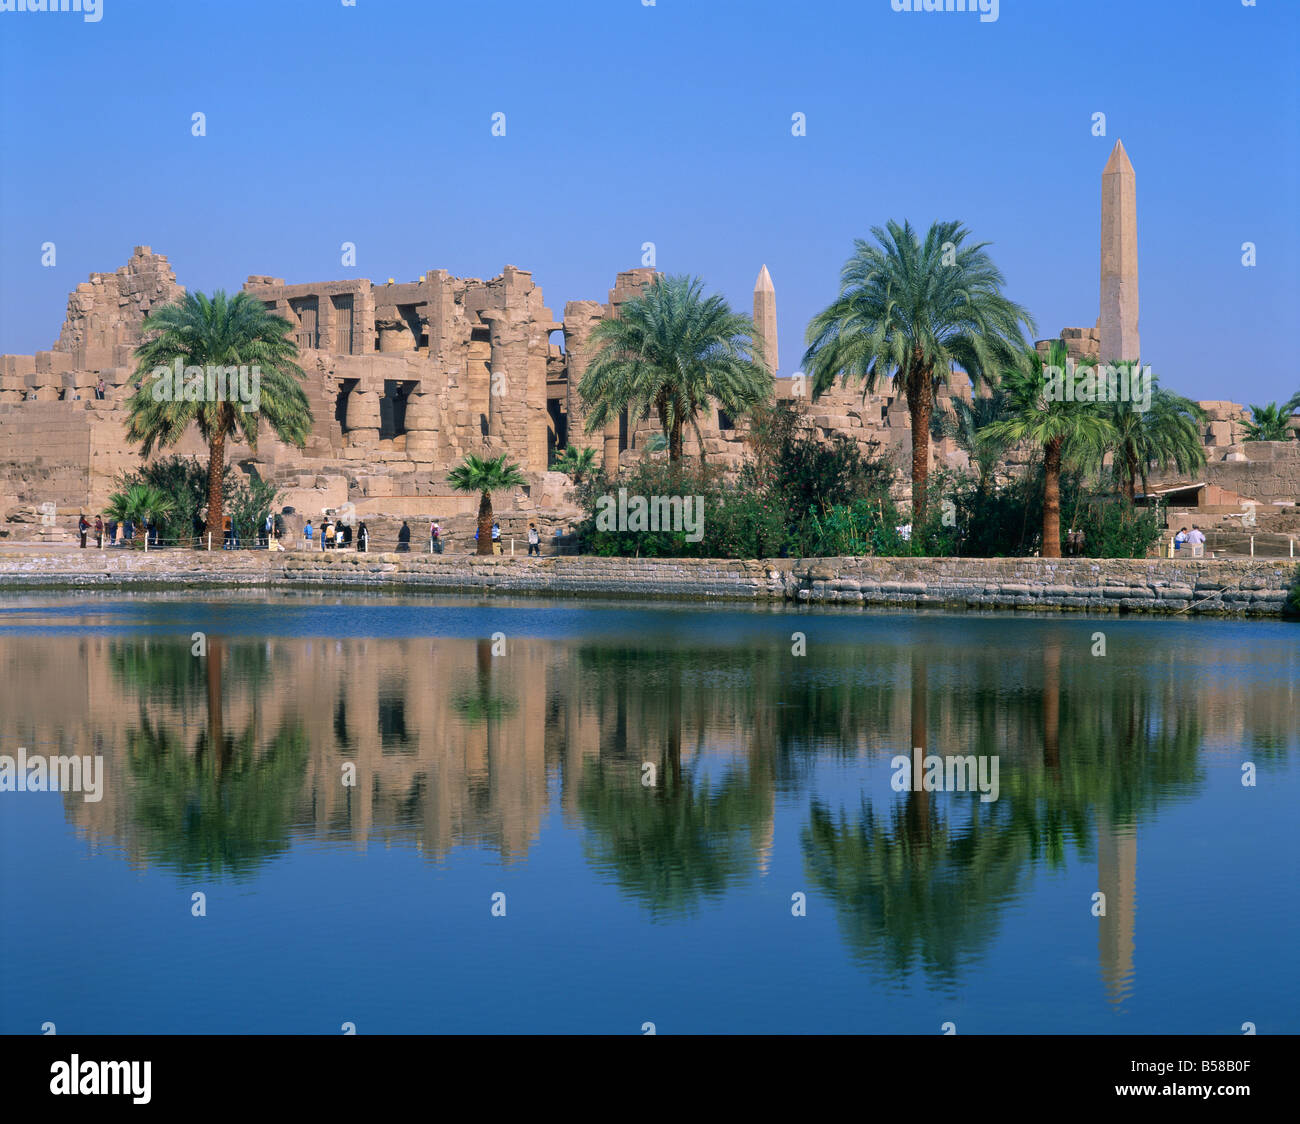 Reflections in the sacred lake of the temple, obelisks and palm trees at Karnak, near Luxor, Thebes, Egypt Stock Photo